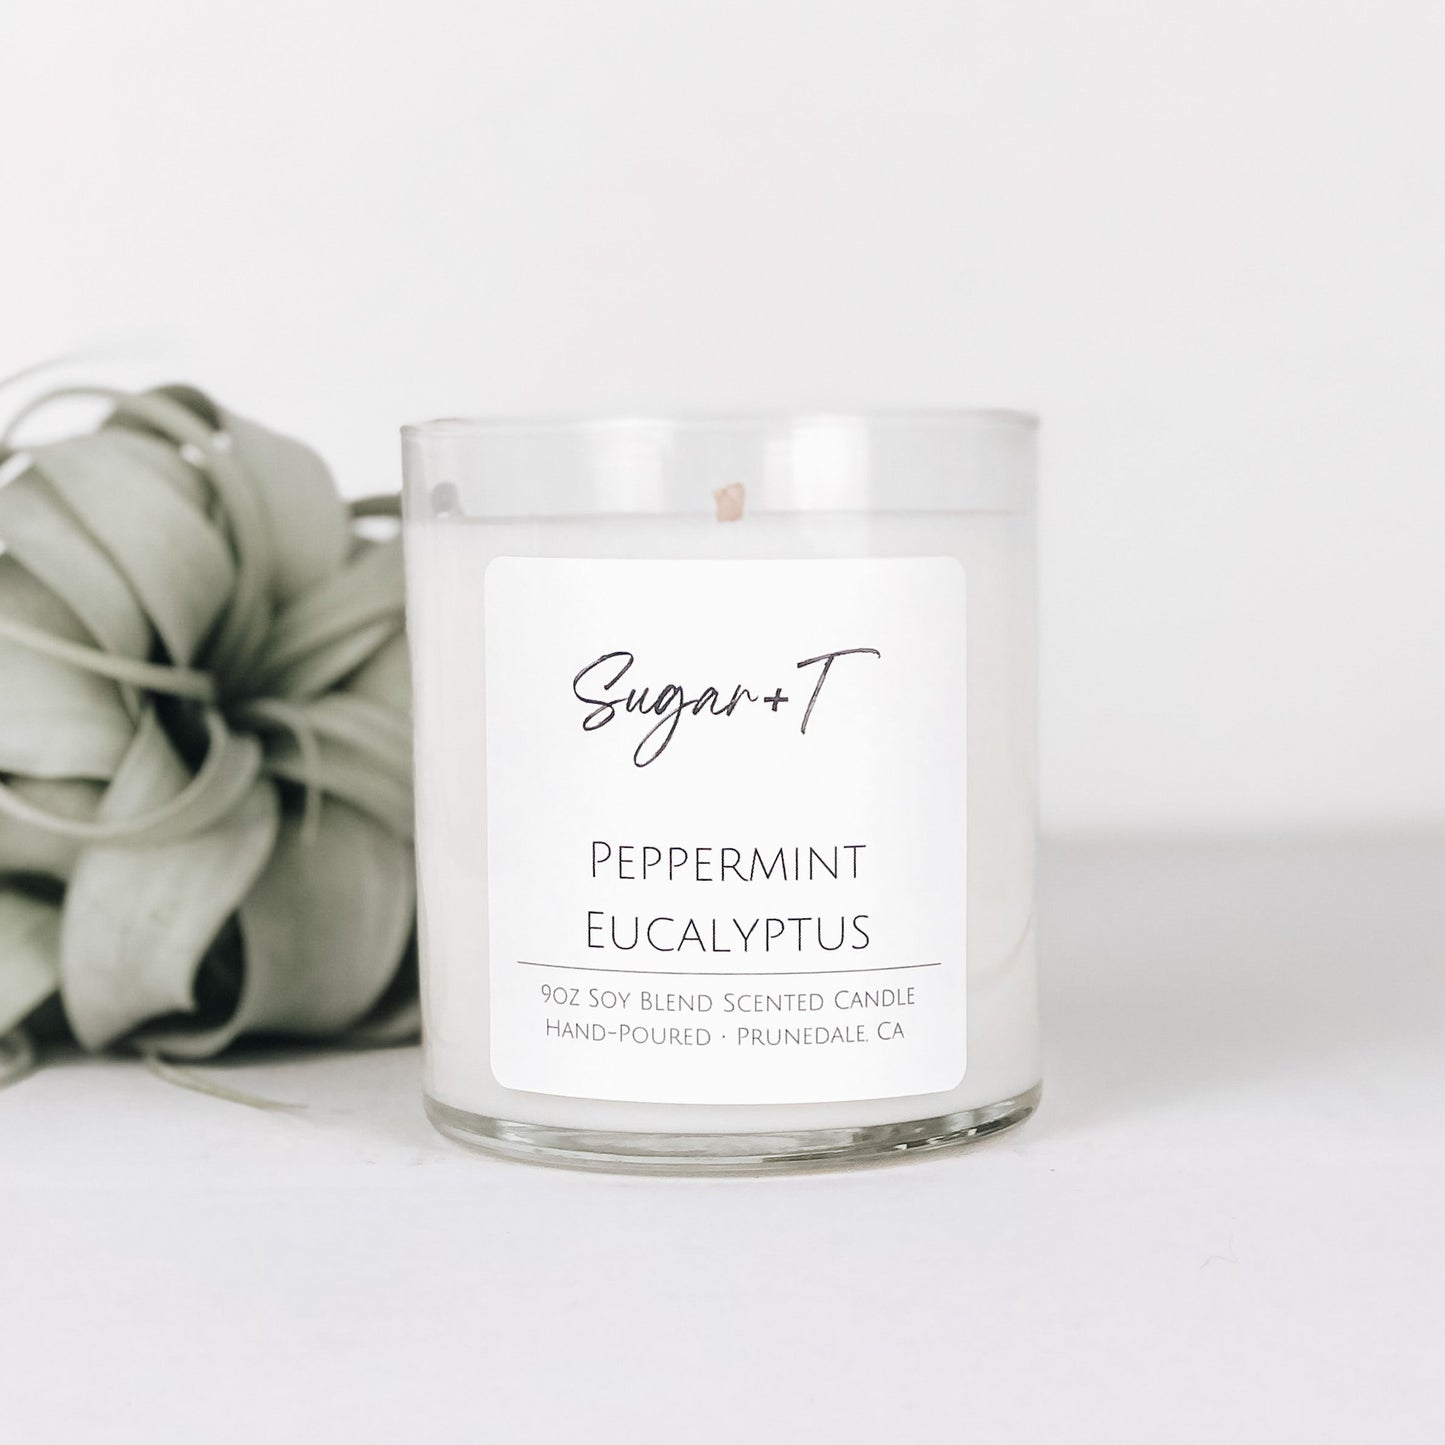 Peppermint Eucalyptus Scented Candle